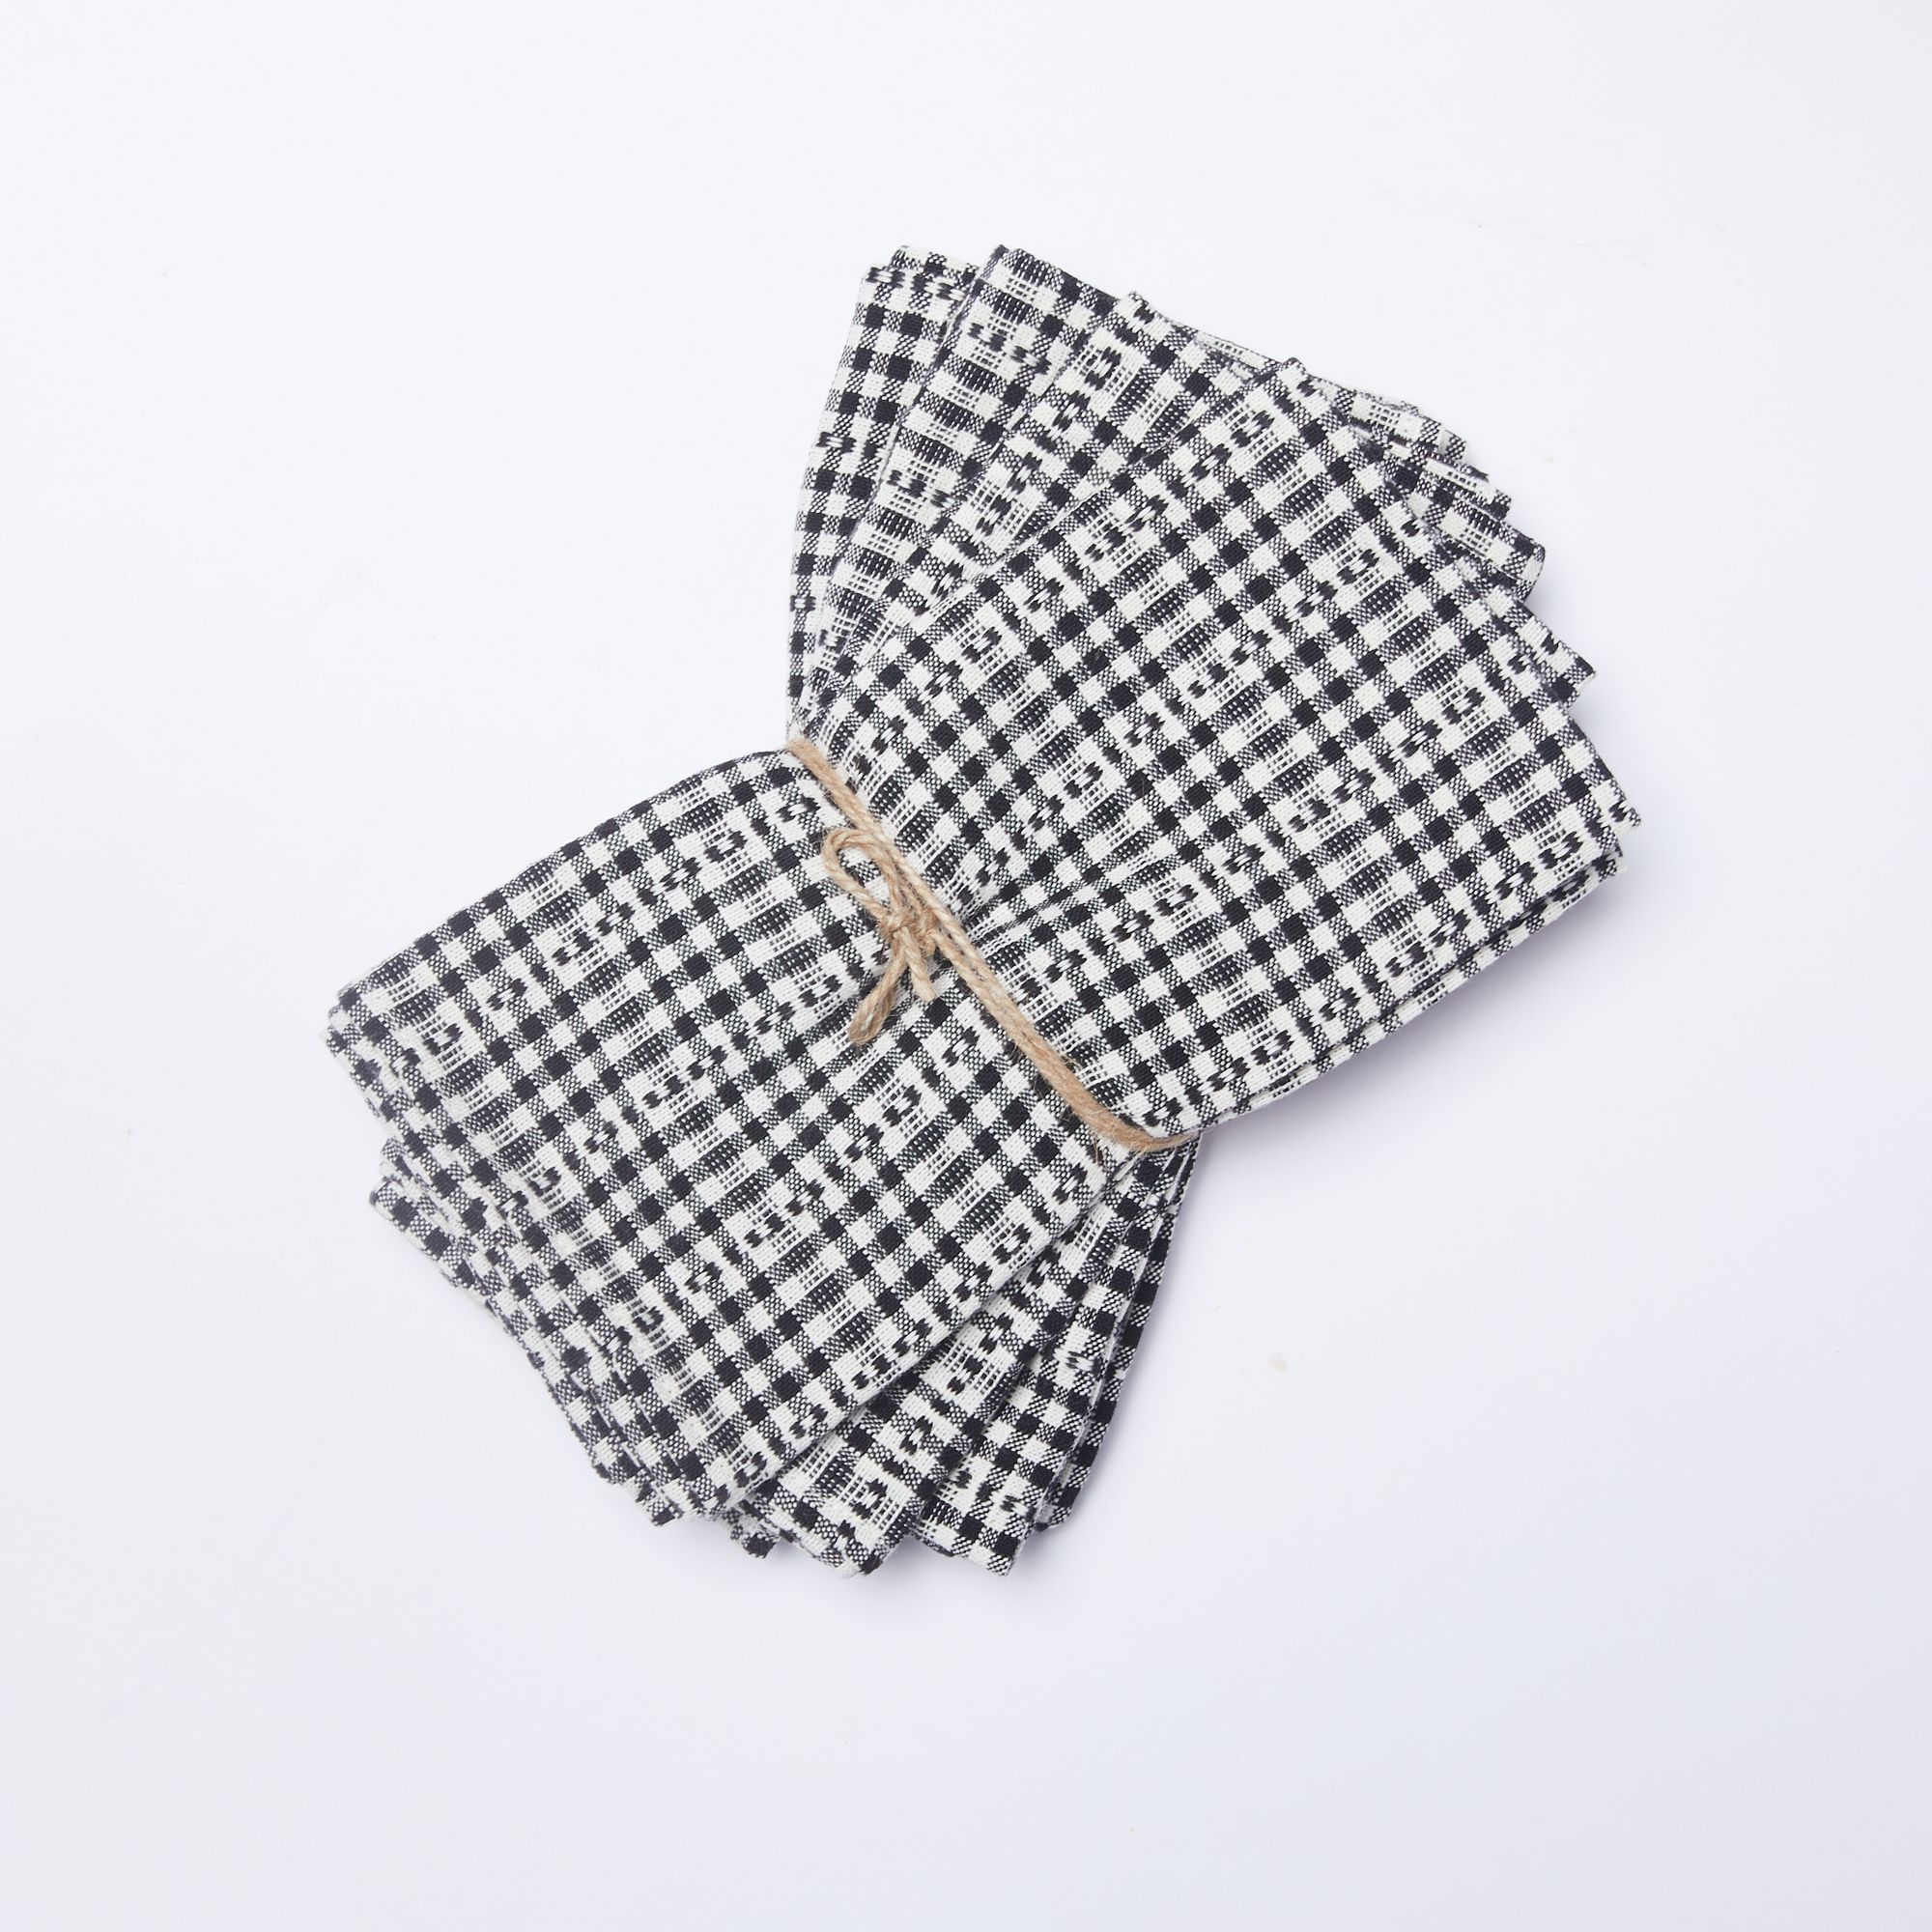 Stack of four black and white gingham cotton napkins tied with a string